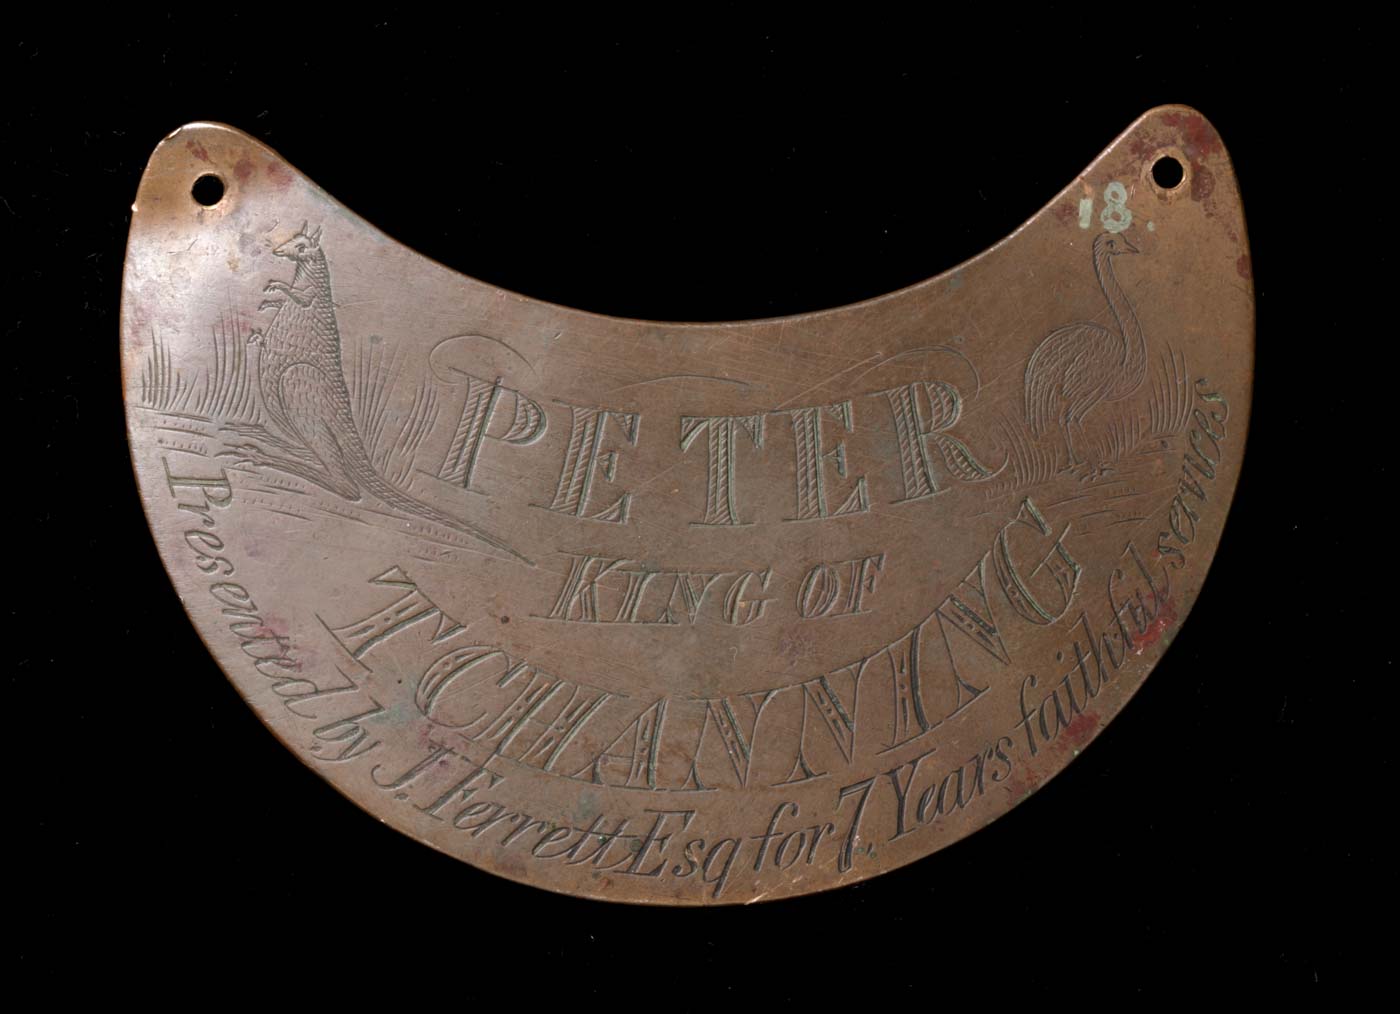 Engraved breastplate that reads 'Peter, King of Tchanning, presented by J. Ferrett Esq for 7 years faithful services'.